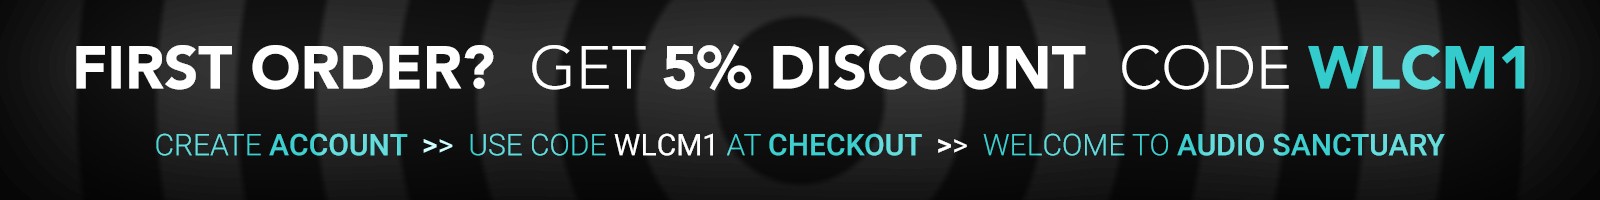 New customer? Get 5% discount on your first order! | Audio Sanctuary.